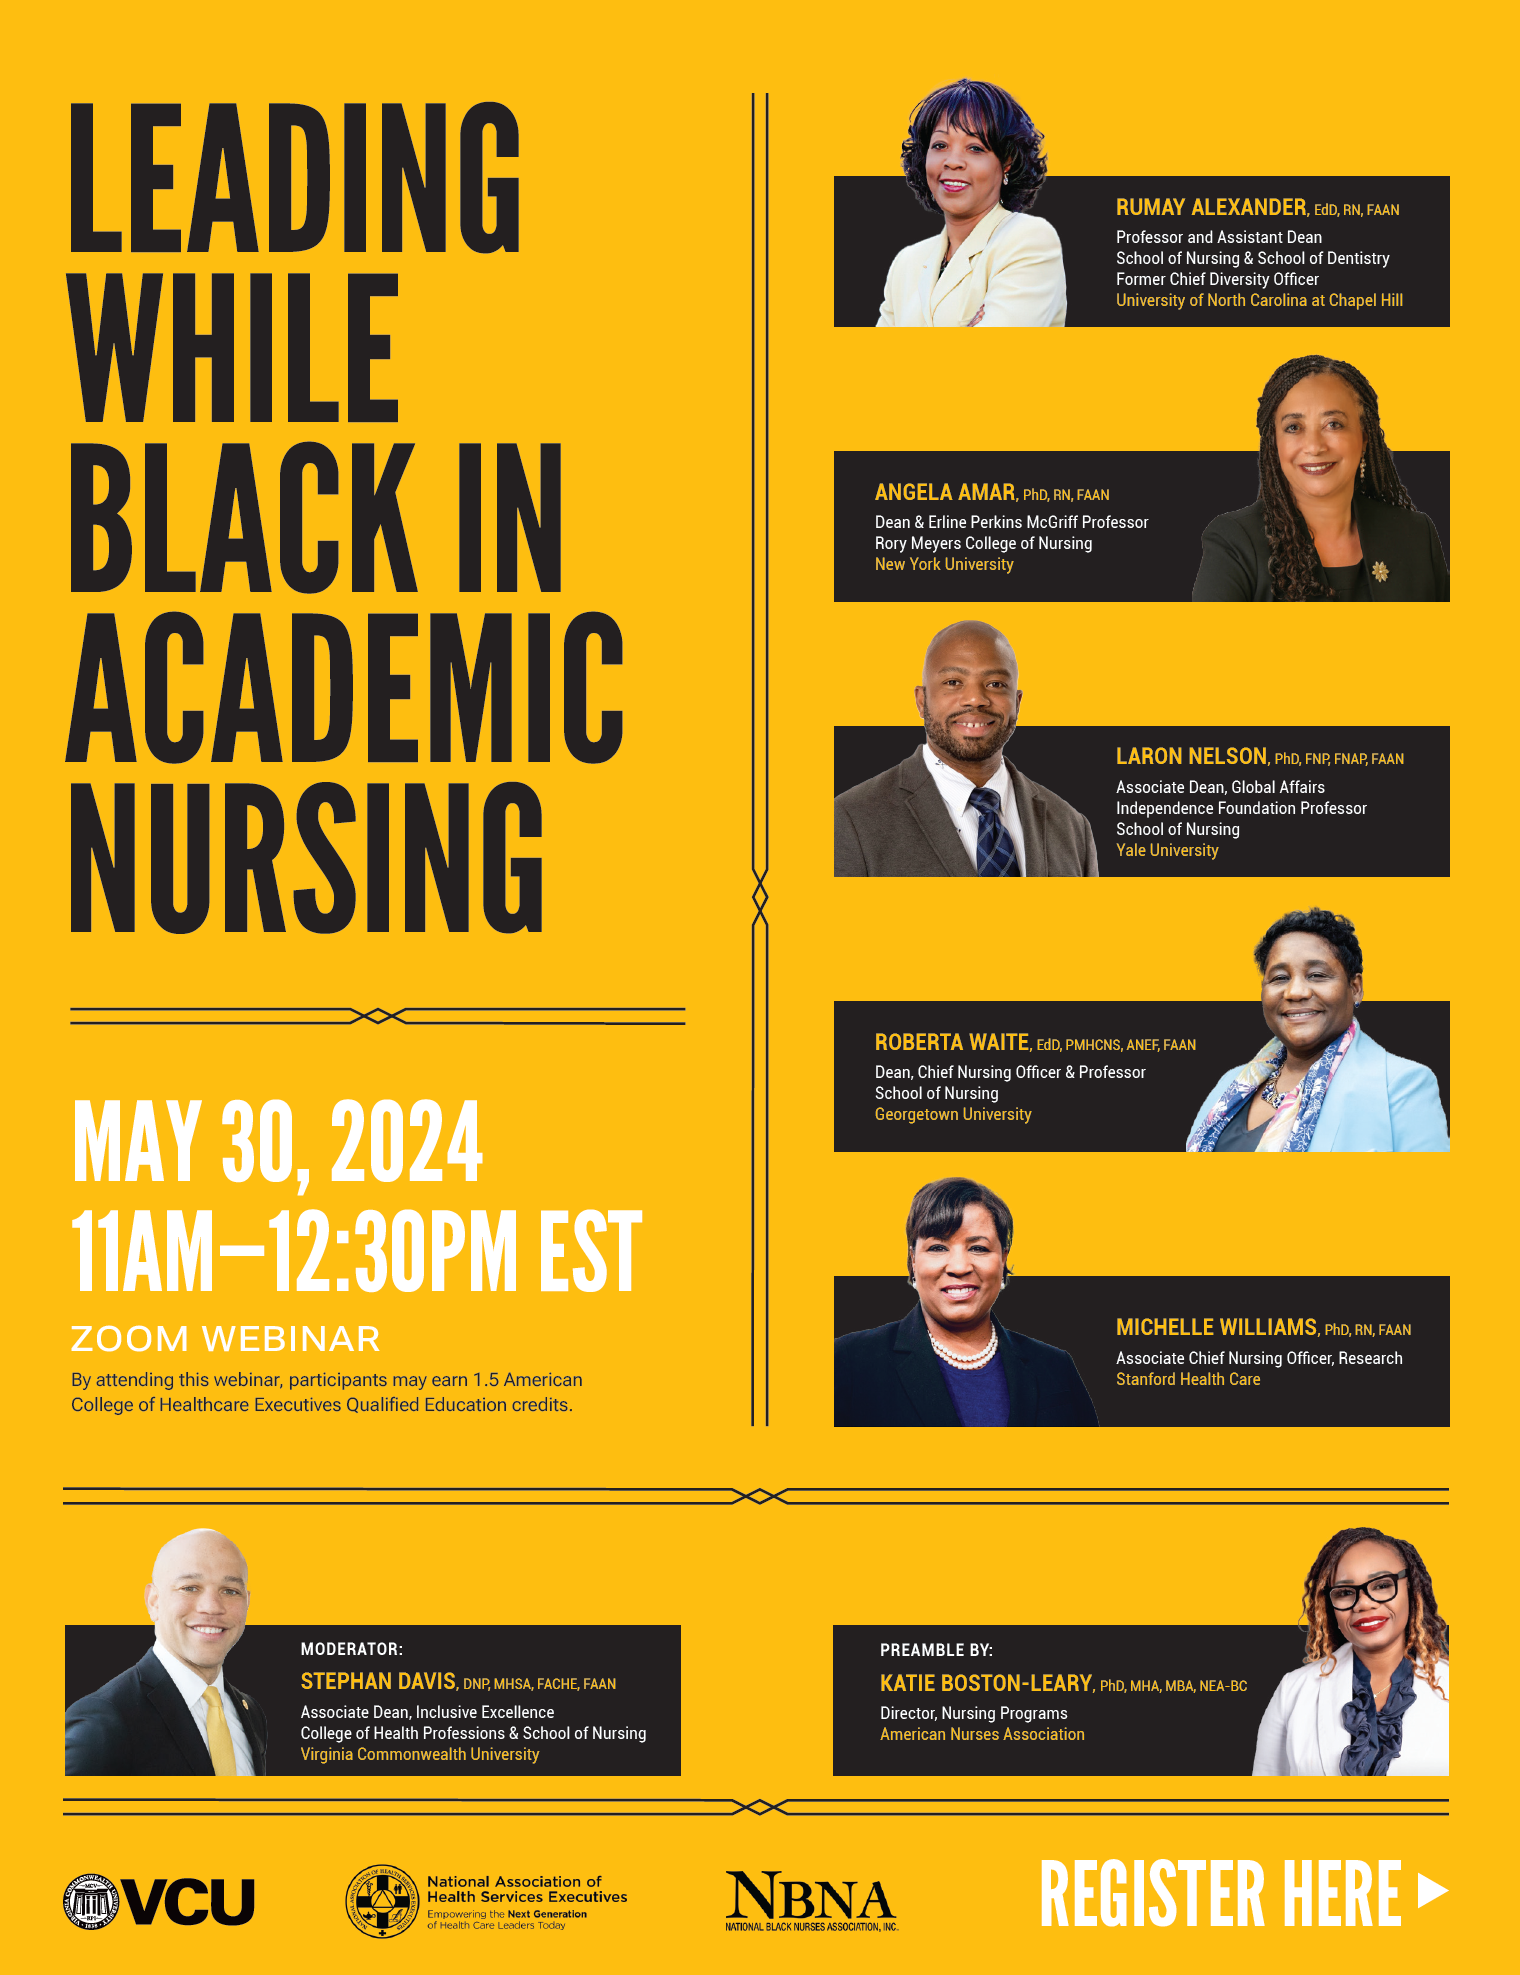 Leading While Black in Academic Nursing May 30 2024 11AM-12:30PM EST, Zoom Webinar, By attending this webinar, participants may earn 1.5 American College of Healthcare Executives Qualified Education credits. Moderator: Stephan Davis. Preamble by Katie Boston-Leary. Panelists: Rumay Alexander, Angela Amar, Laron Nelson, Roberta Waite, Michelle Williams